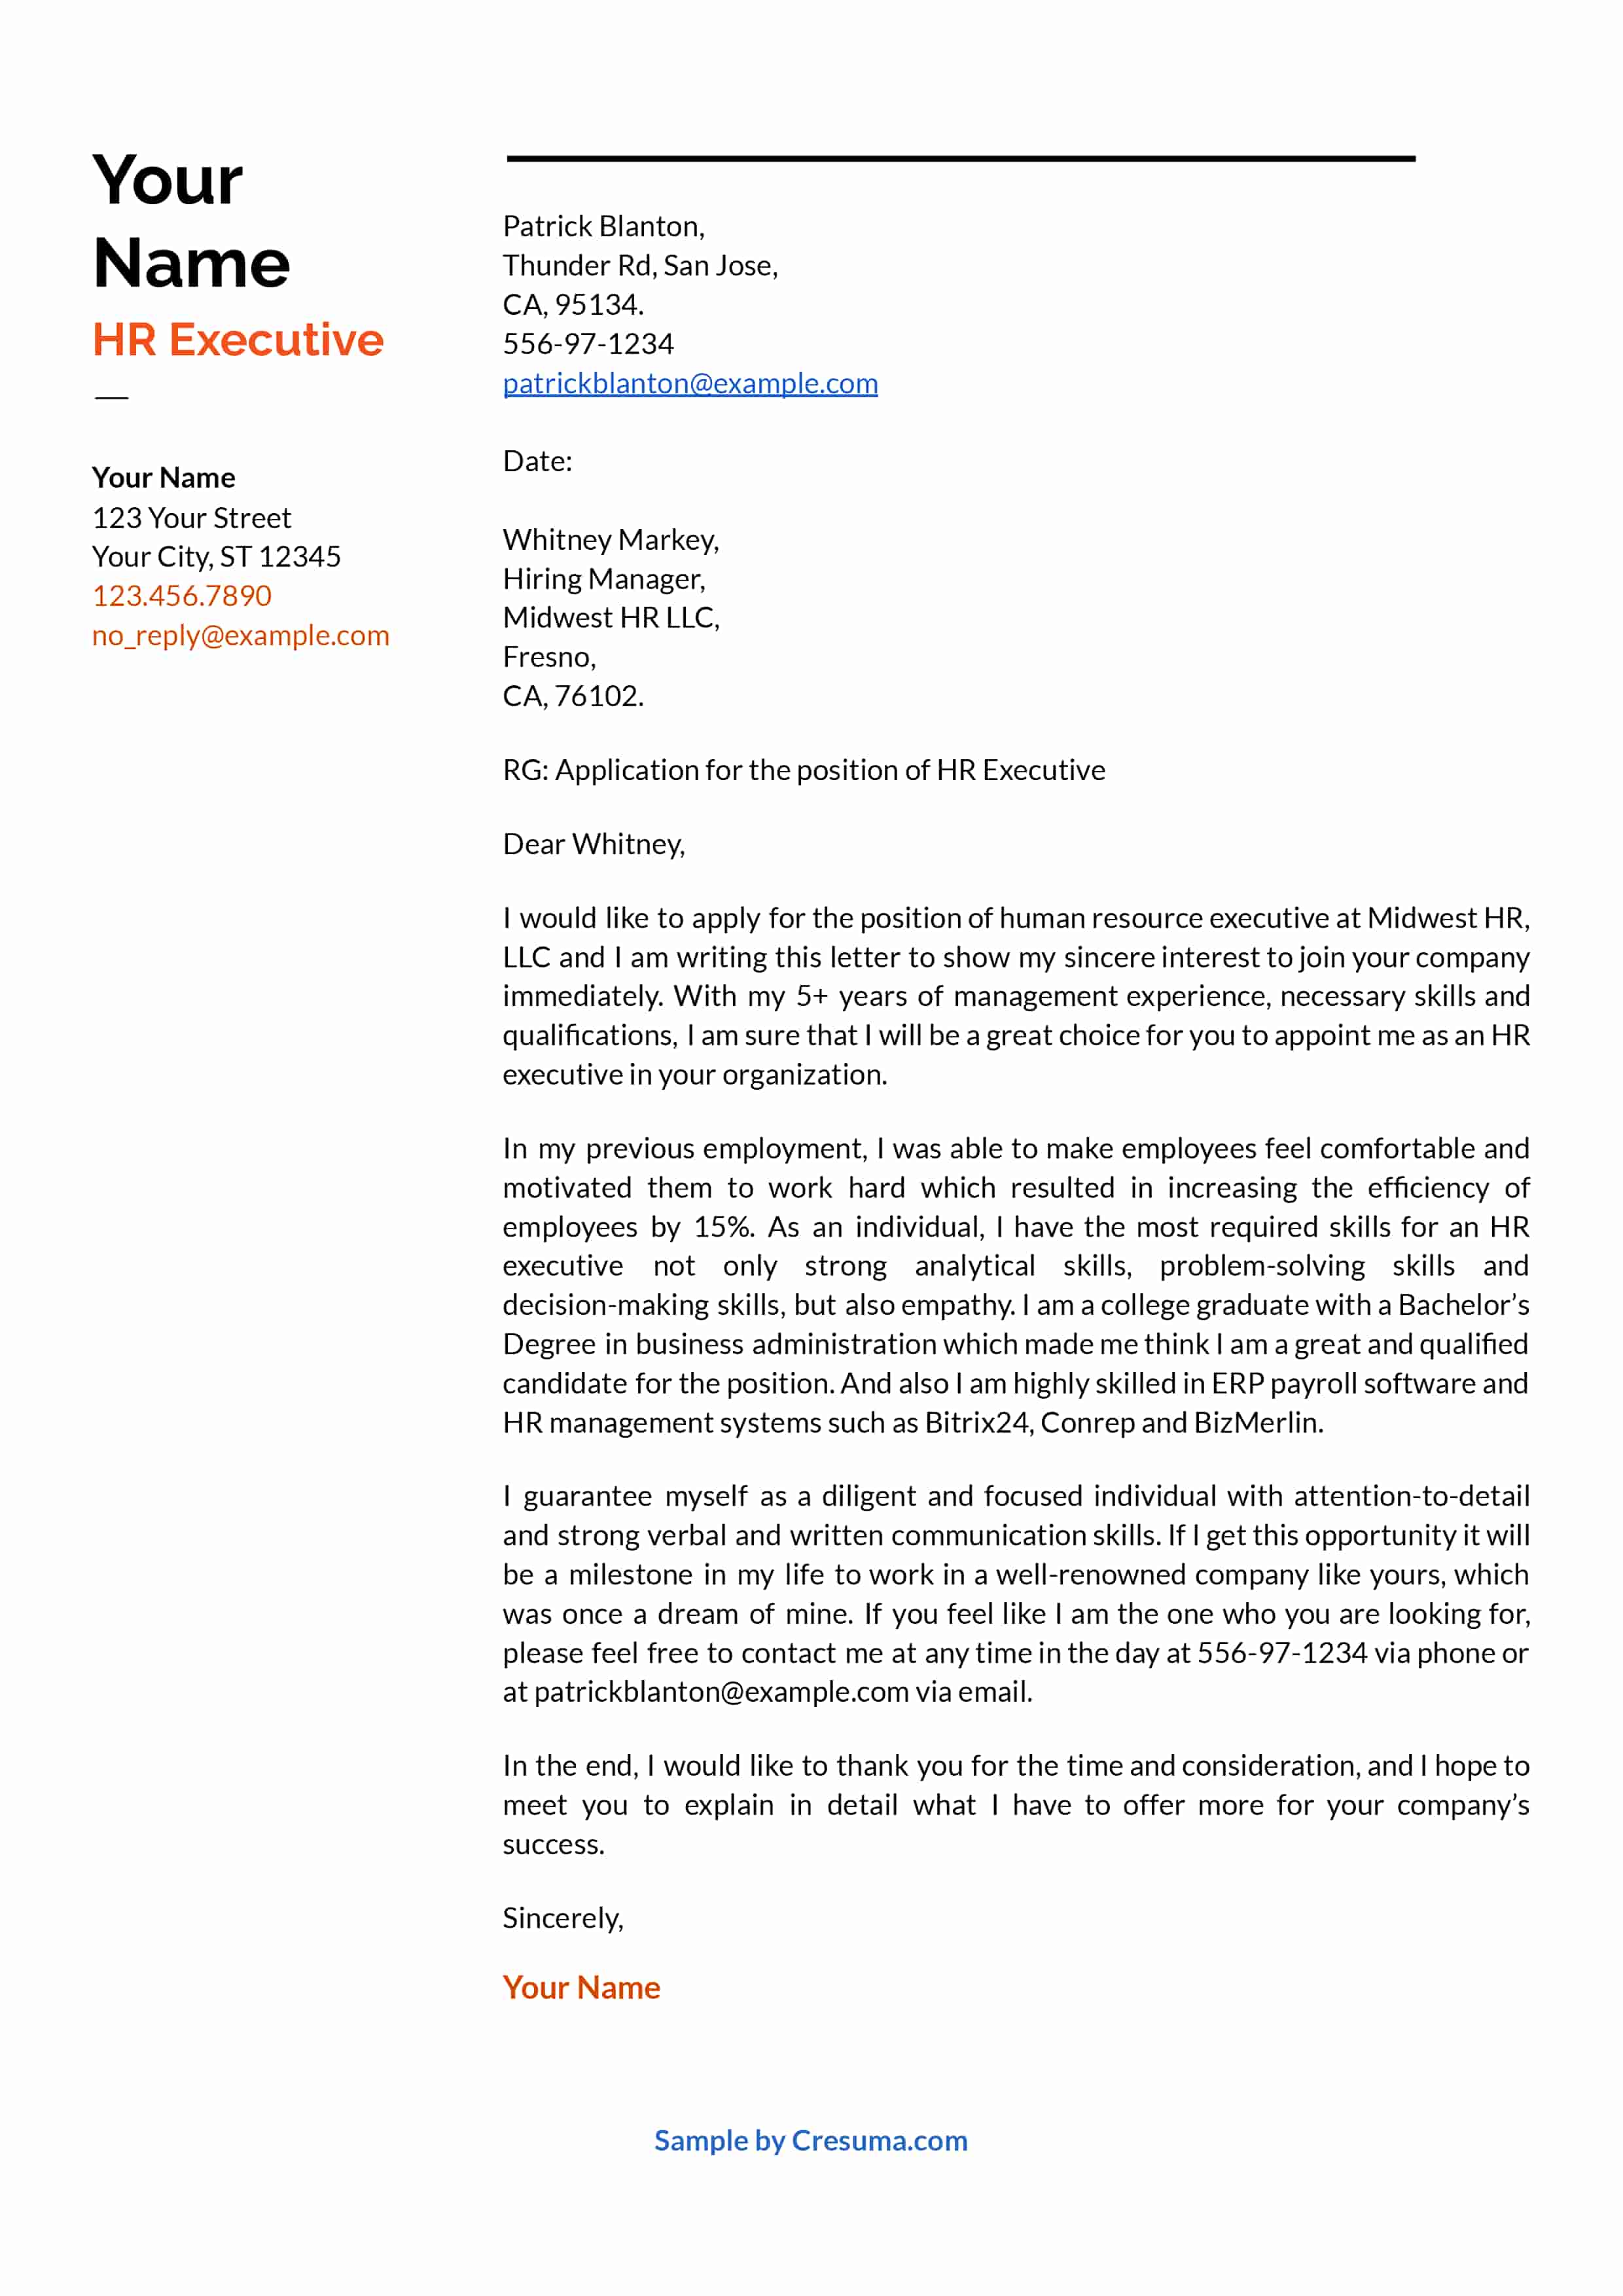 HR executive cover letter sample template 1